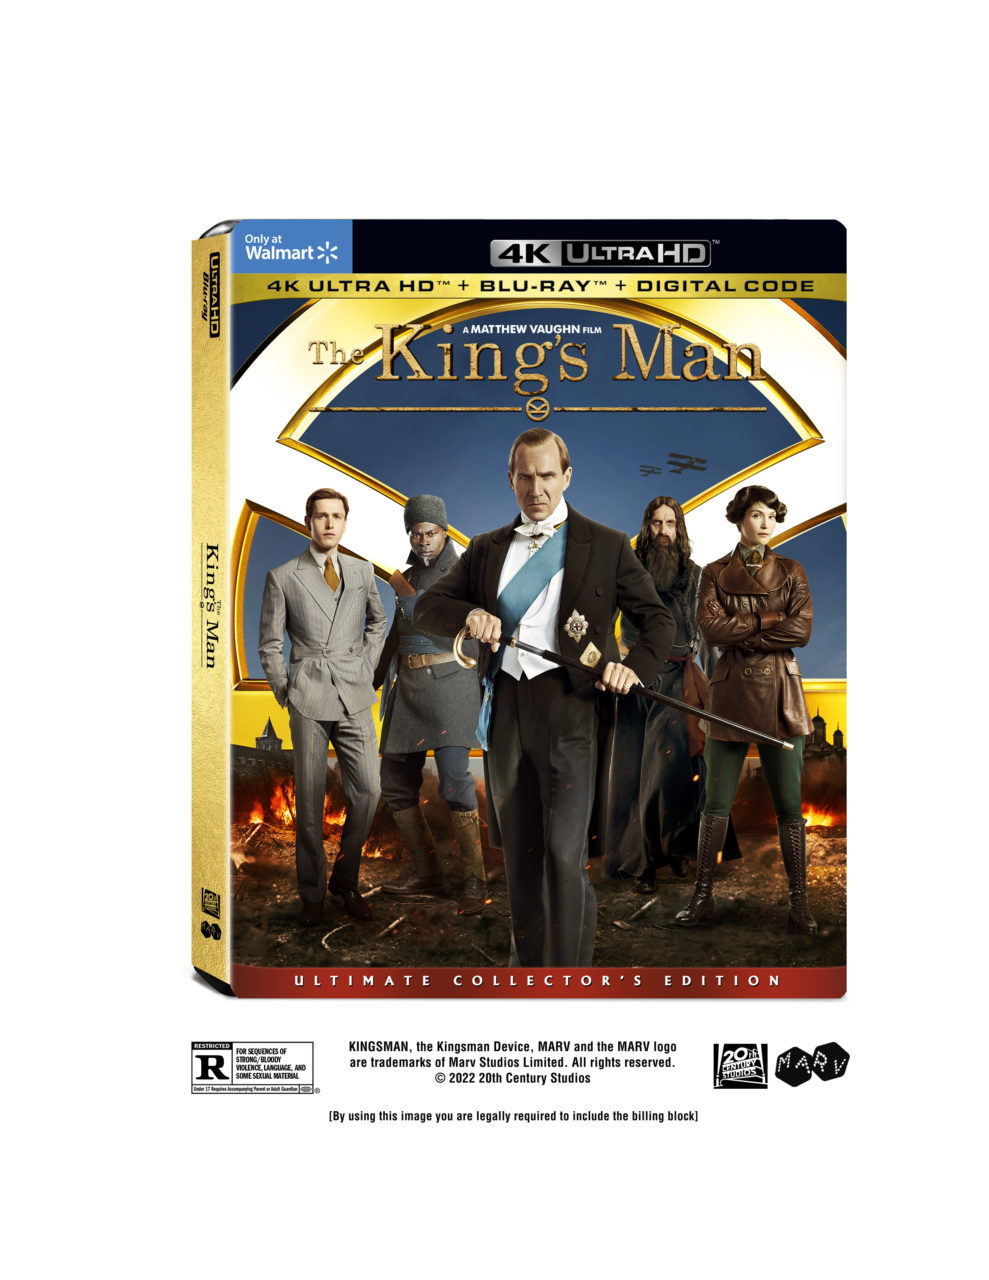 The King's Man 4K Ultra HD Ultimate Collector's Edition Combo Pack cover (Disney Media & Entertainment Distribution)